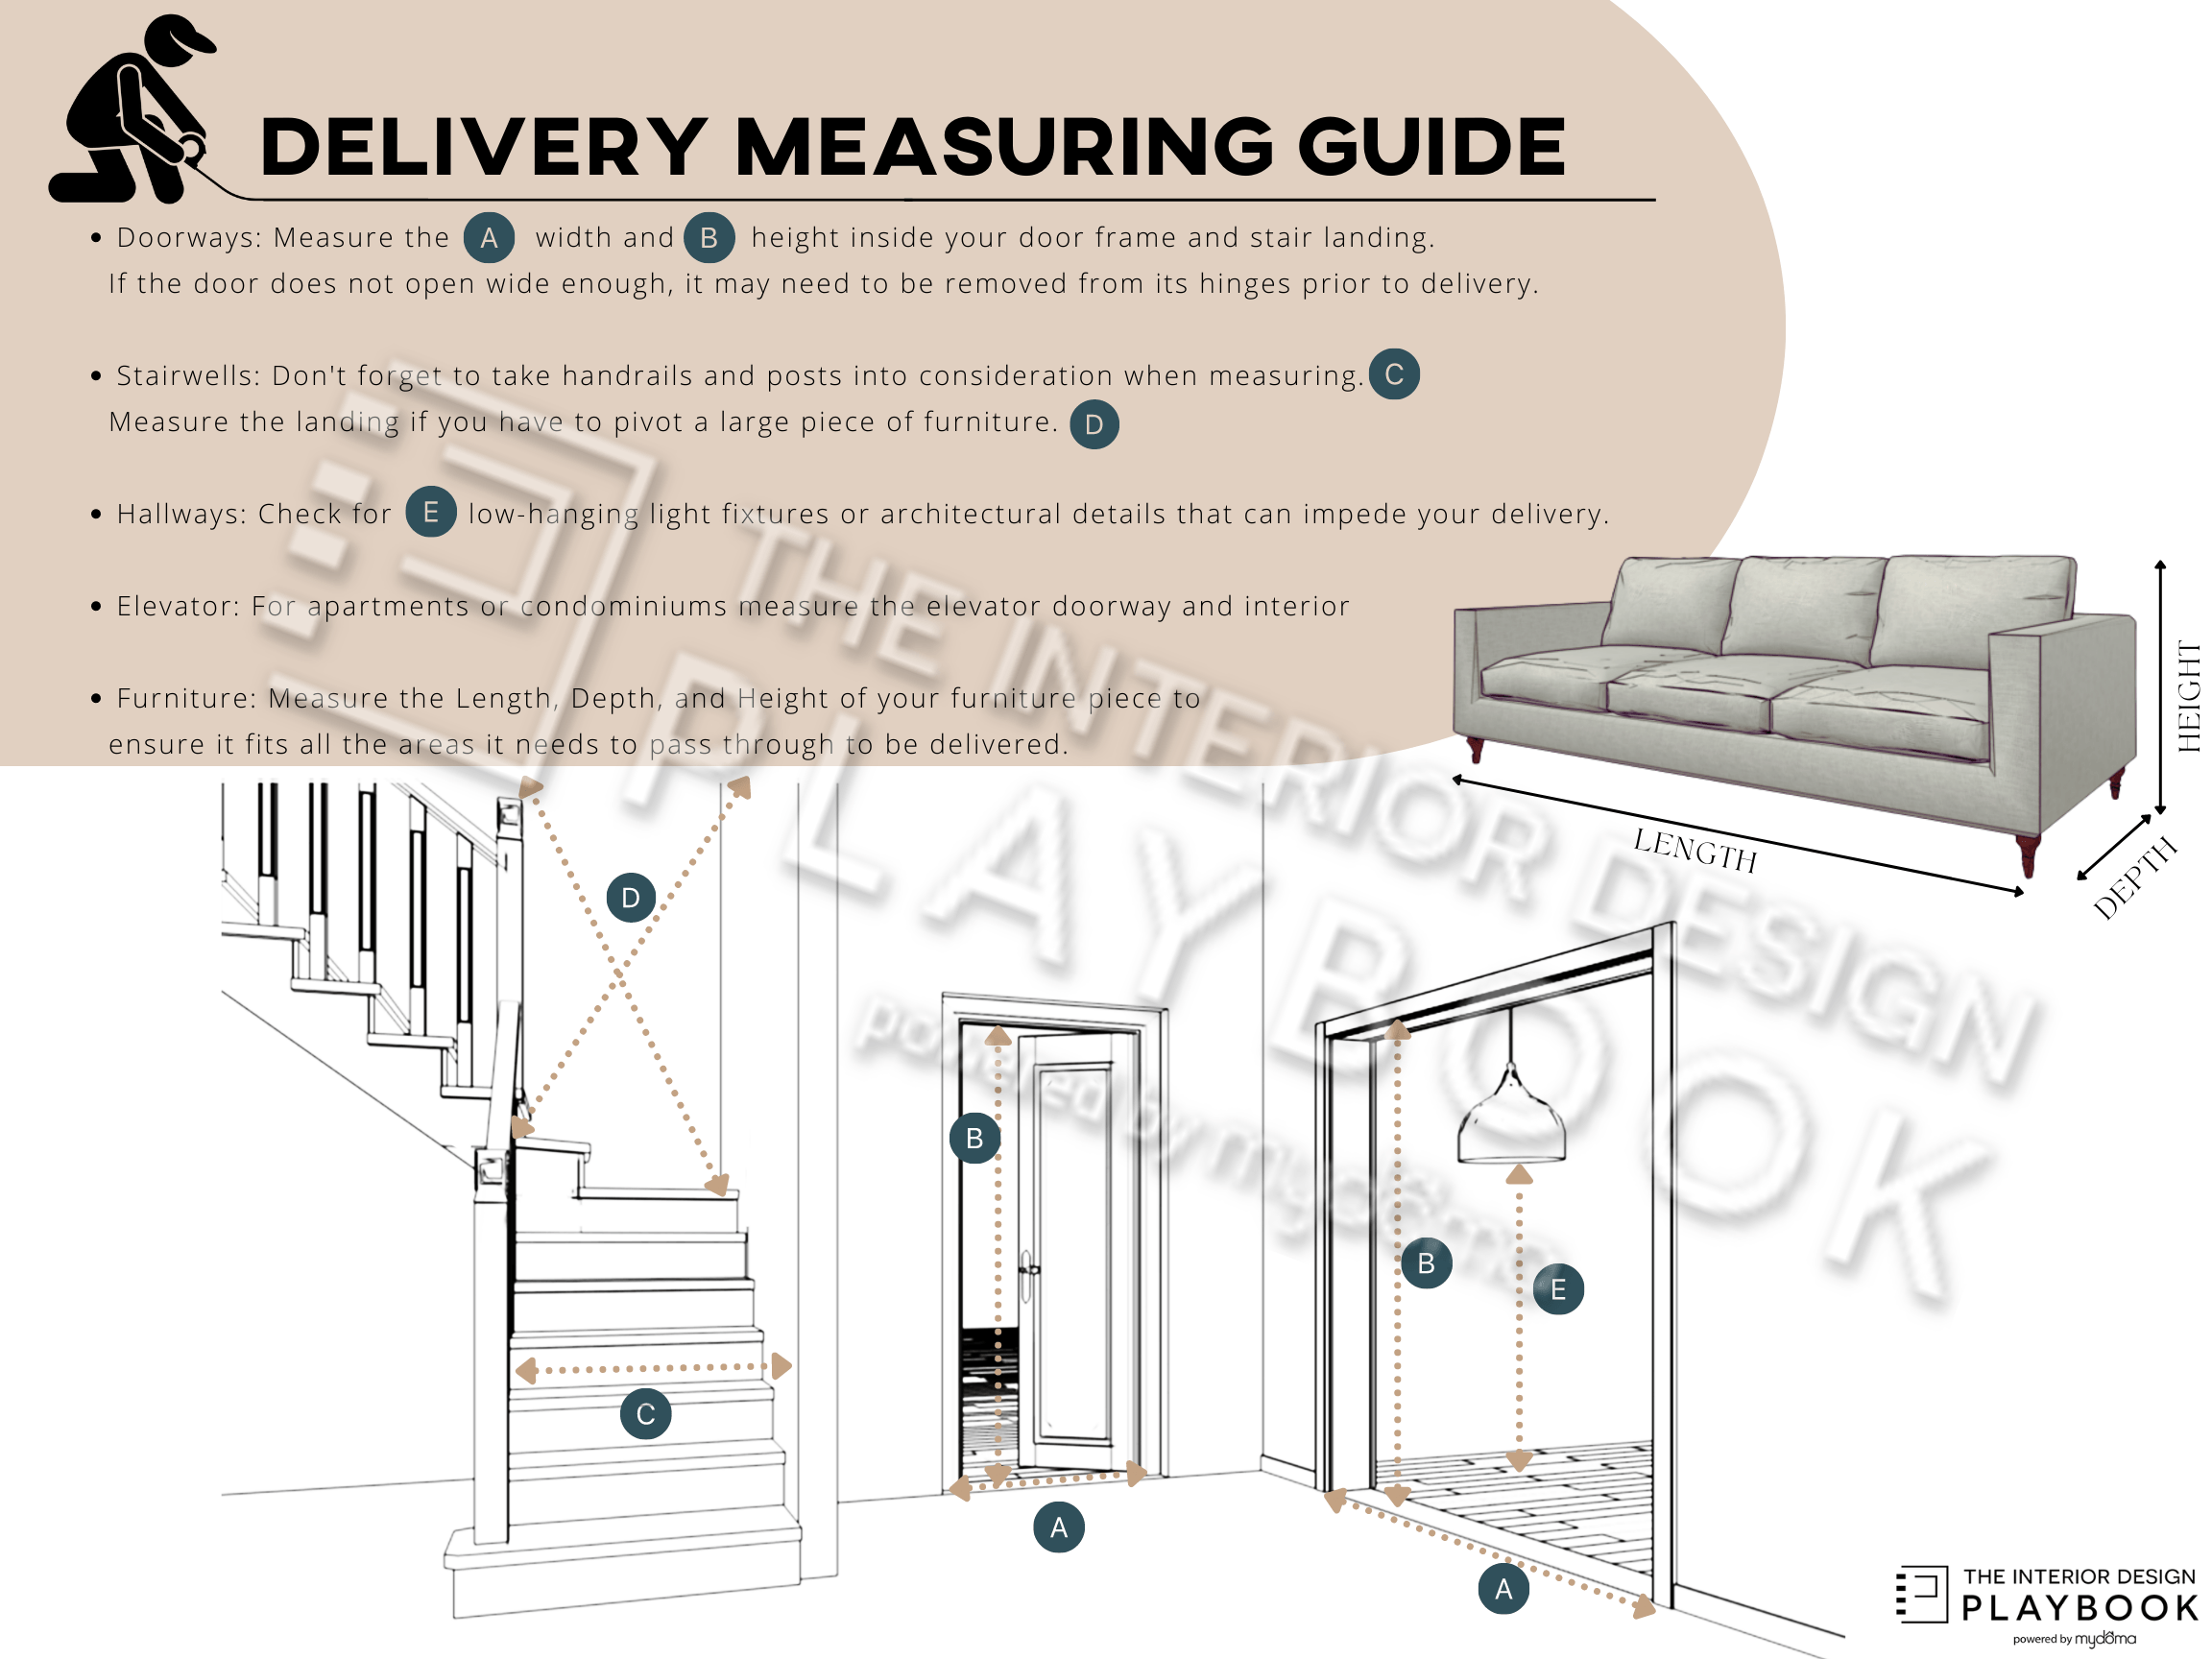 TEMPLATE Delivery Measuring Guide watermark